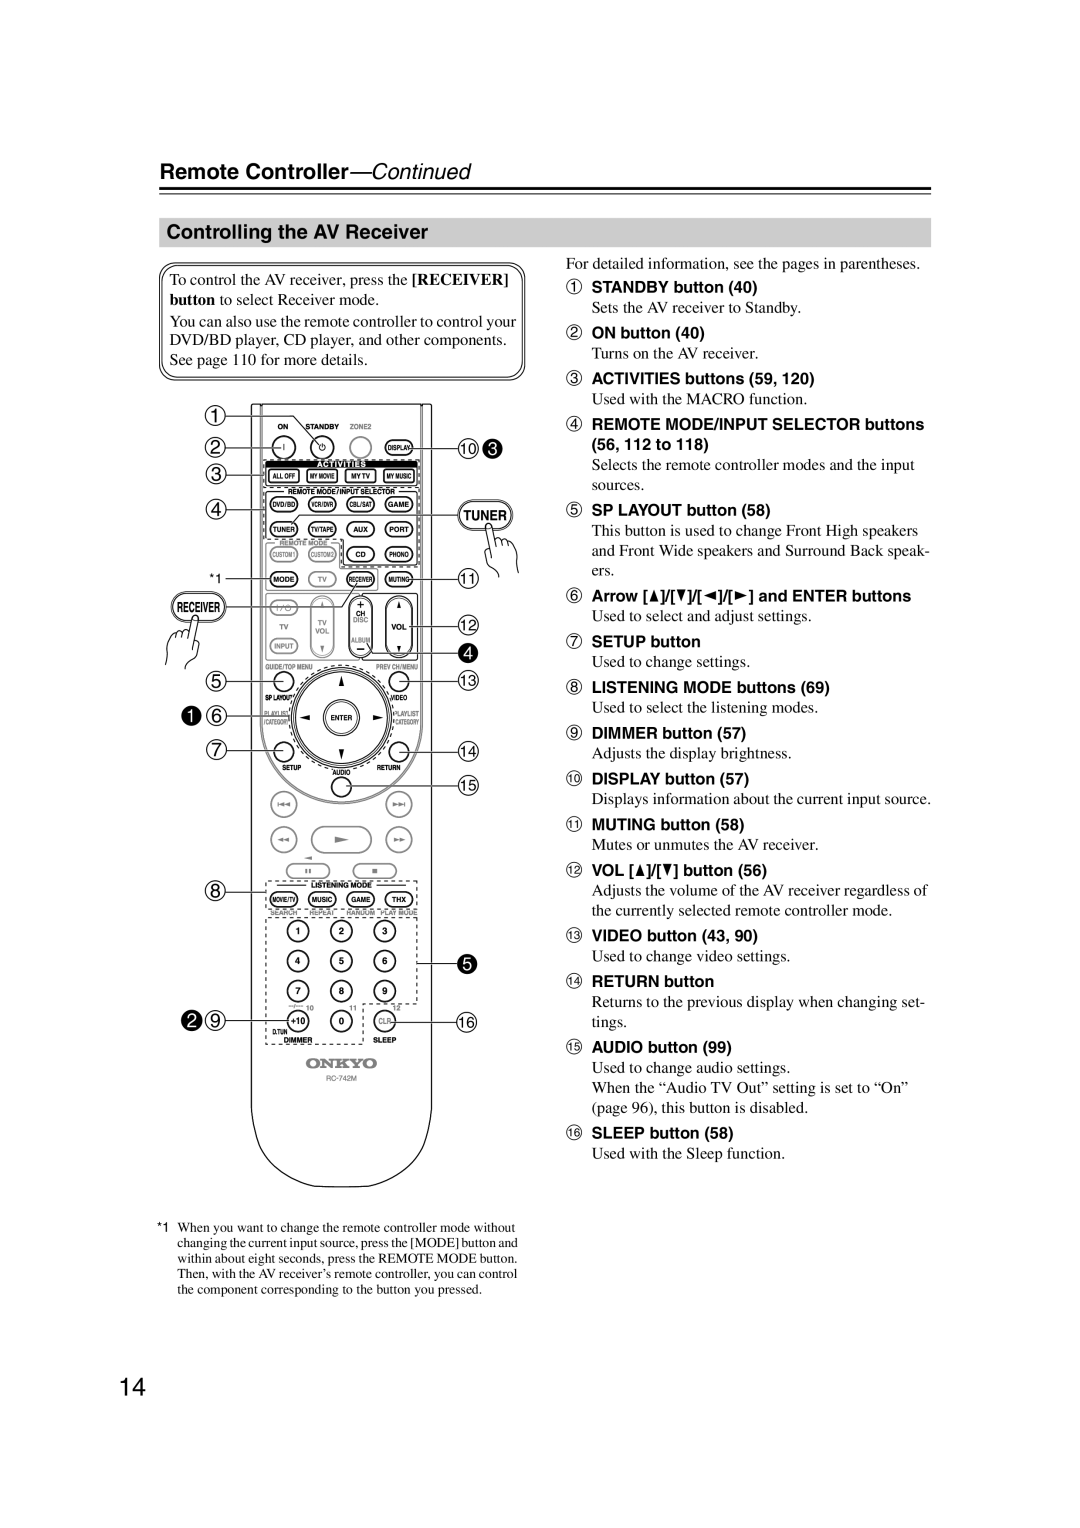 Onkyo TX-SR707 instruction manual Remote Controller—Continued 